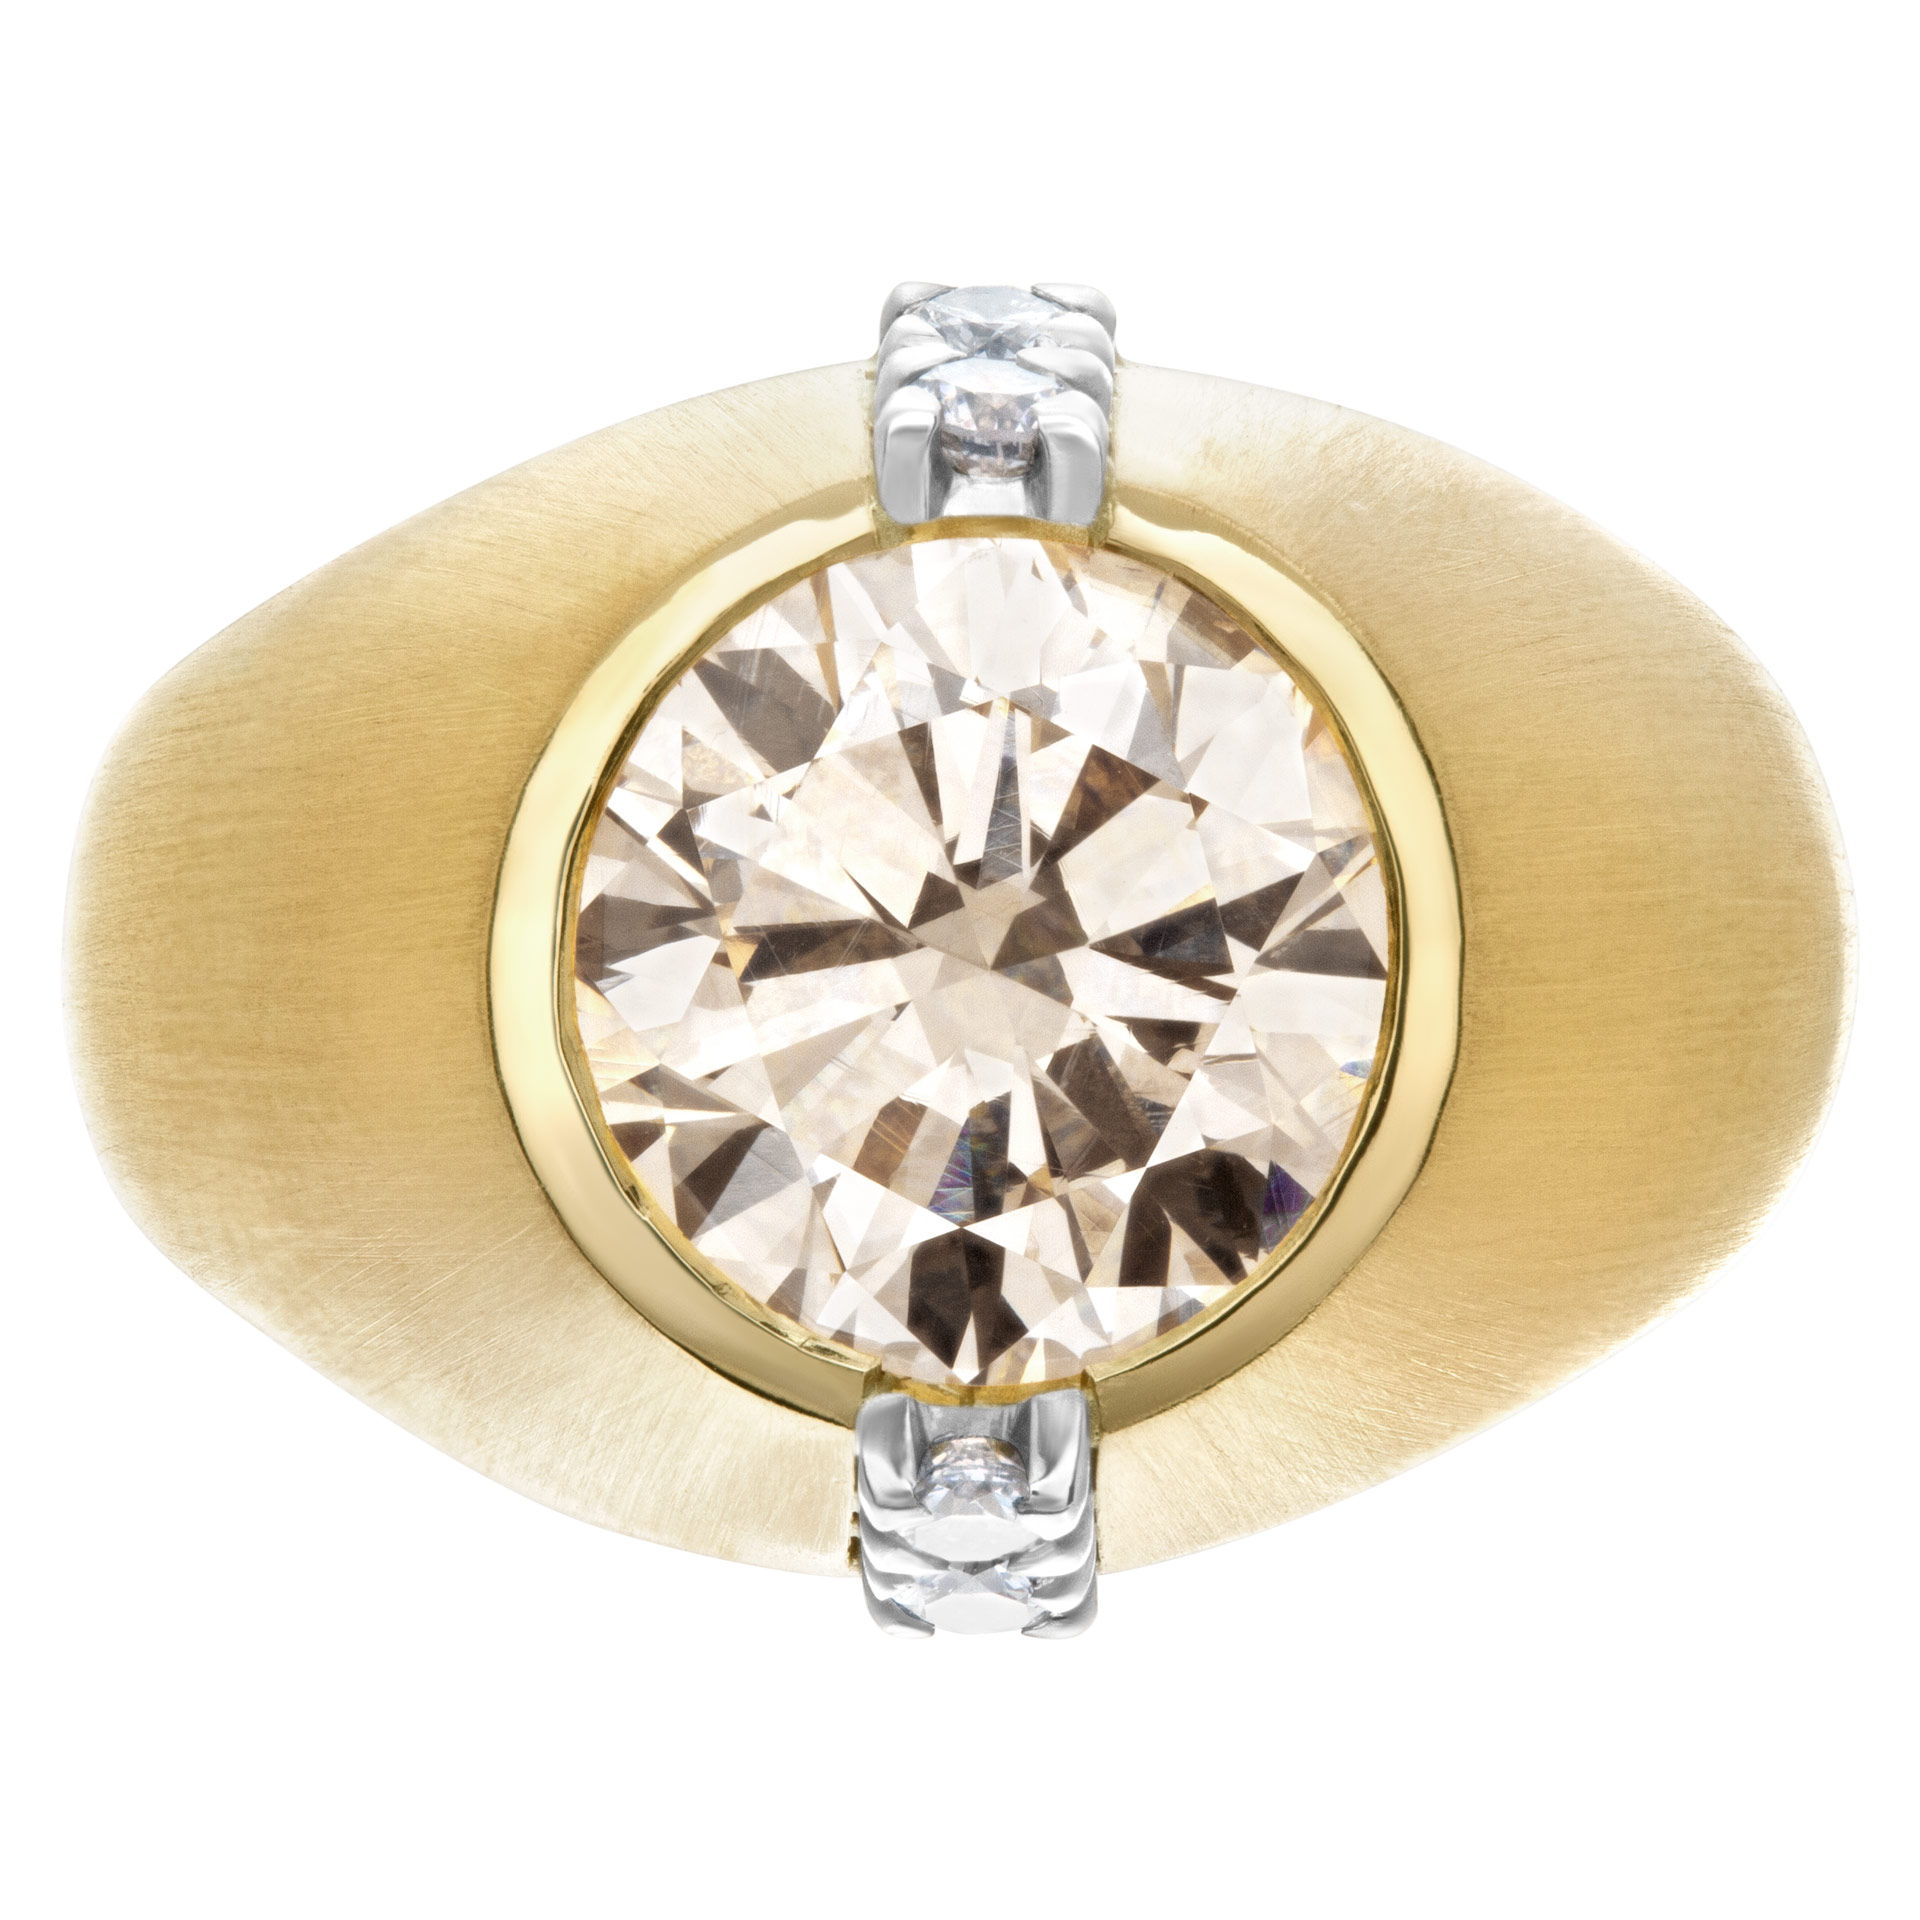 GIA Certified Kutchinsky diamond ring in 18k yellow gold. Warm and bright 4.23 carat center diamond champgane color, VS1 clarity